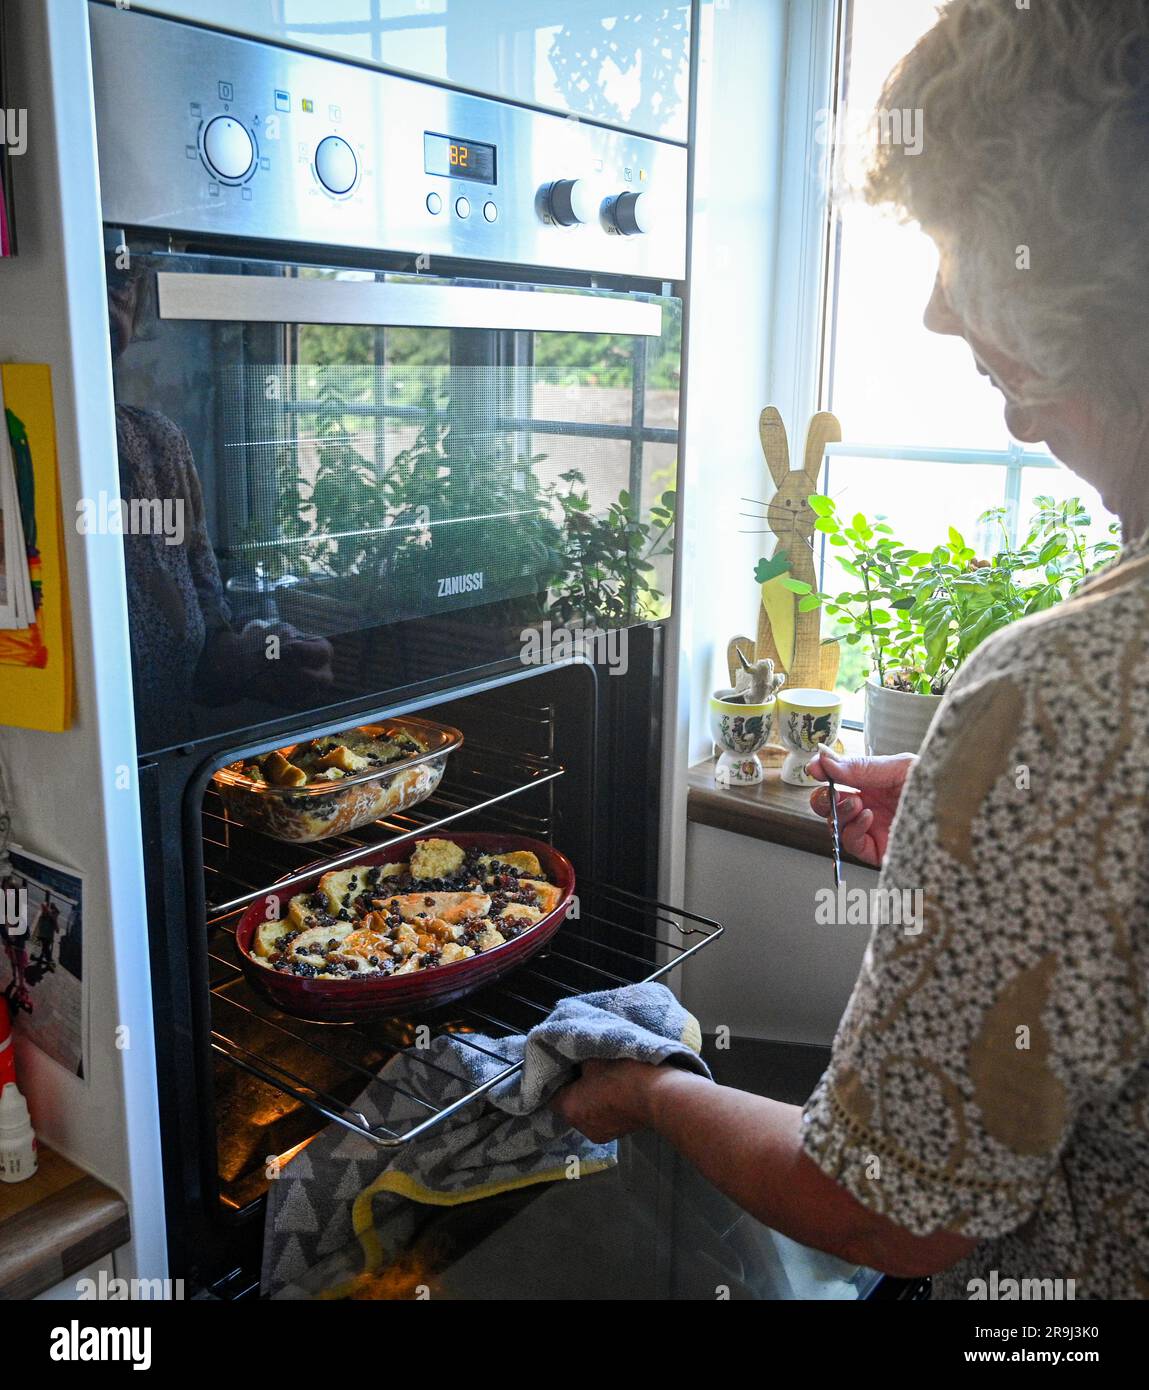 Home made bread and butter pudding being cooked in an electric fan oven in the kitchen Stock Photo